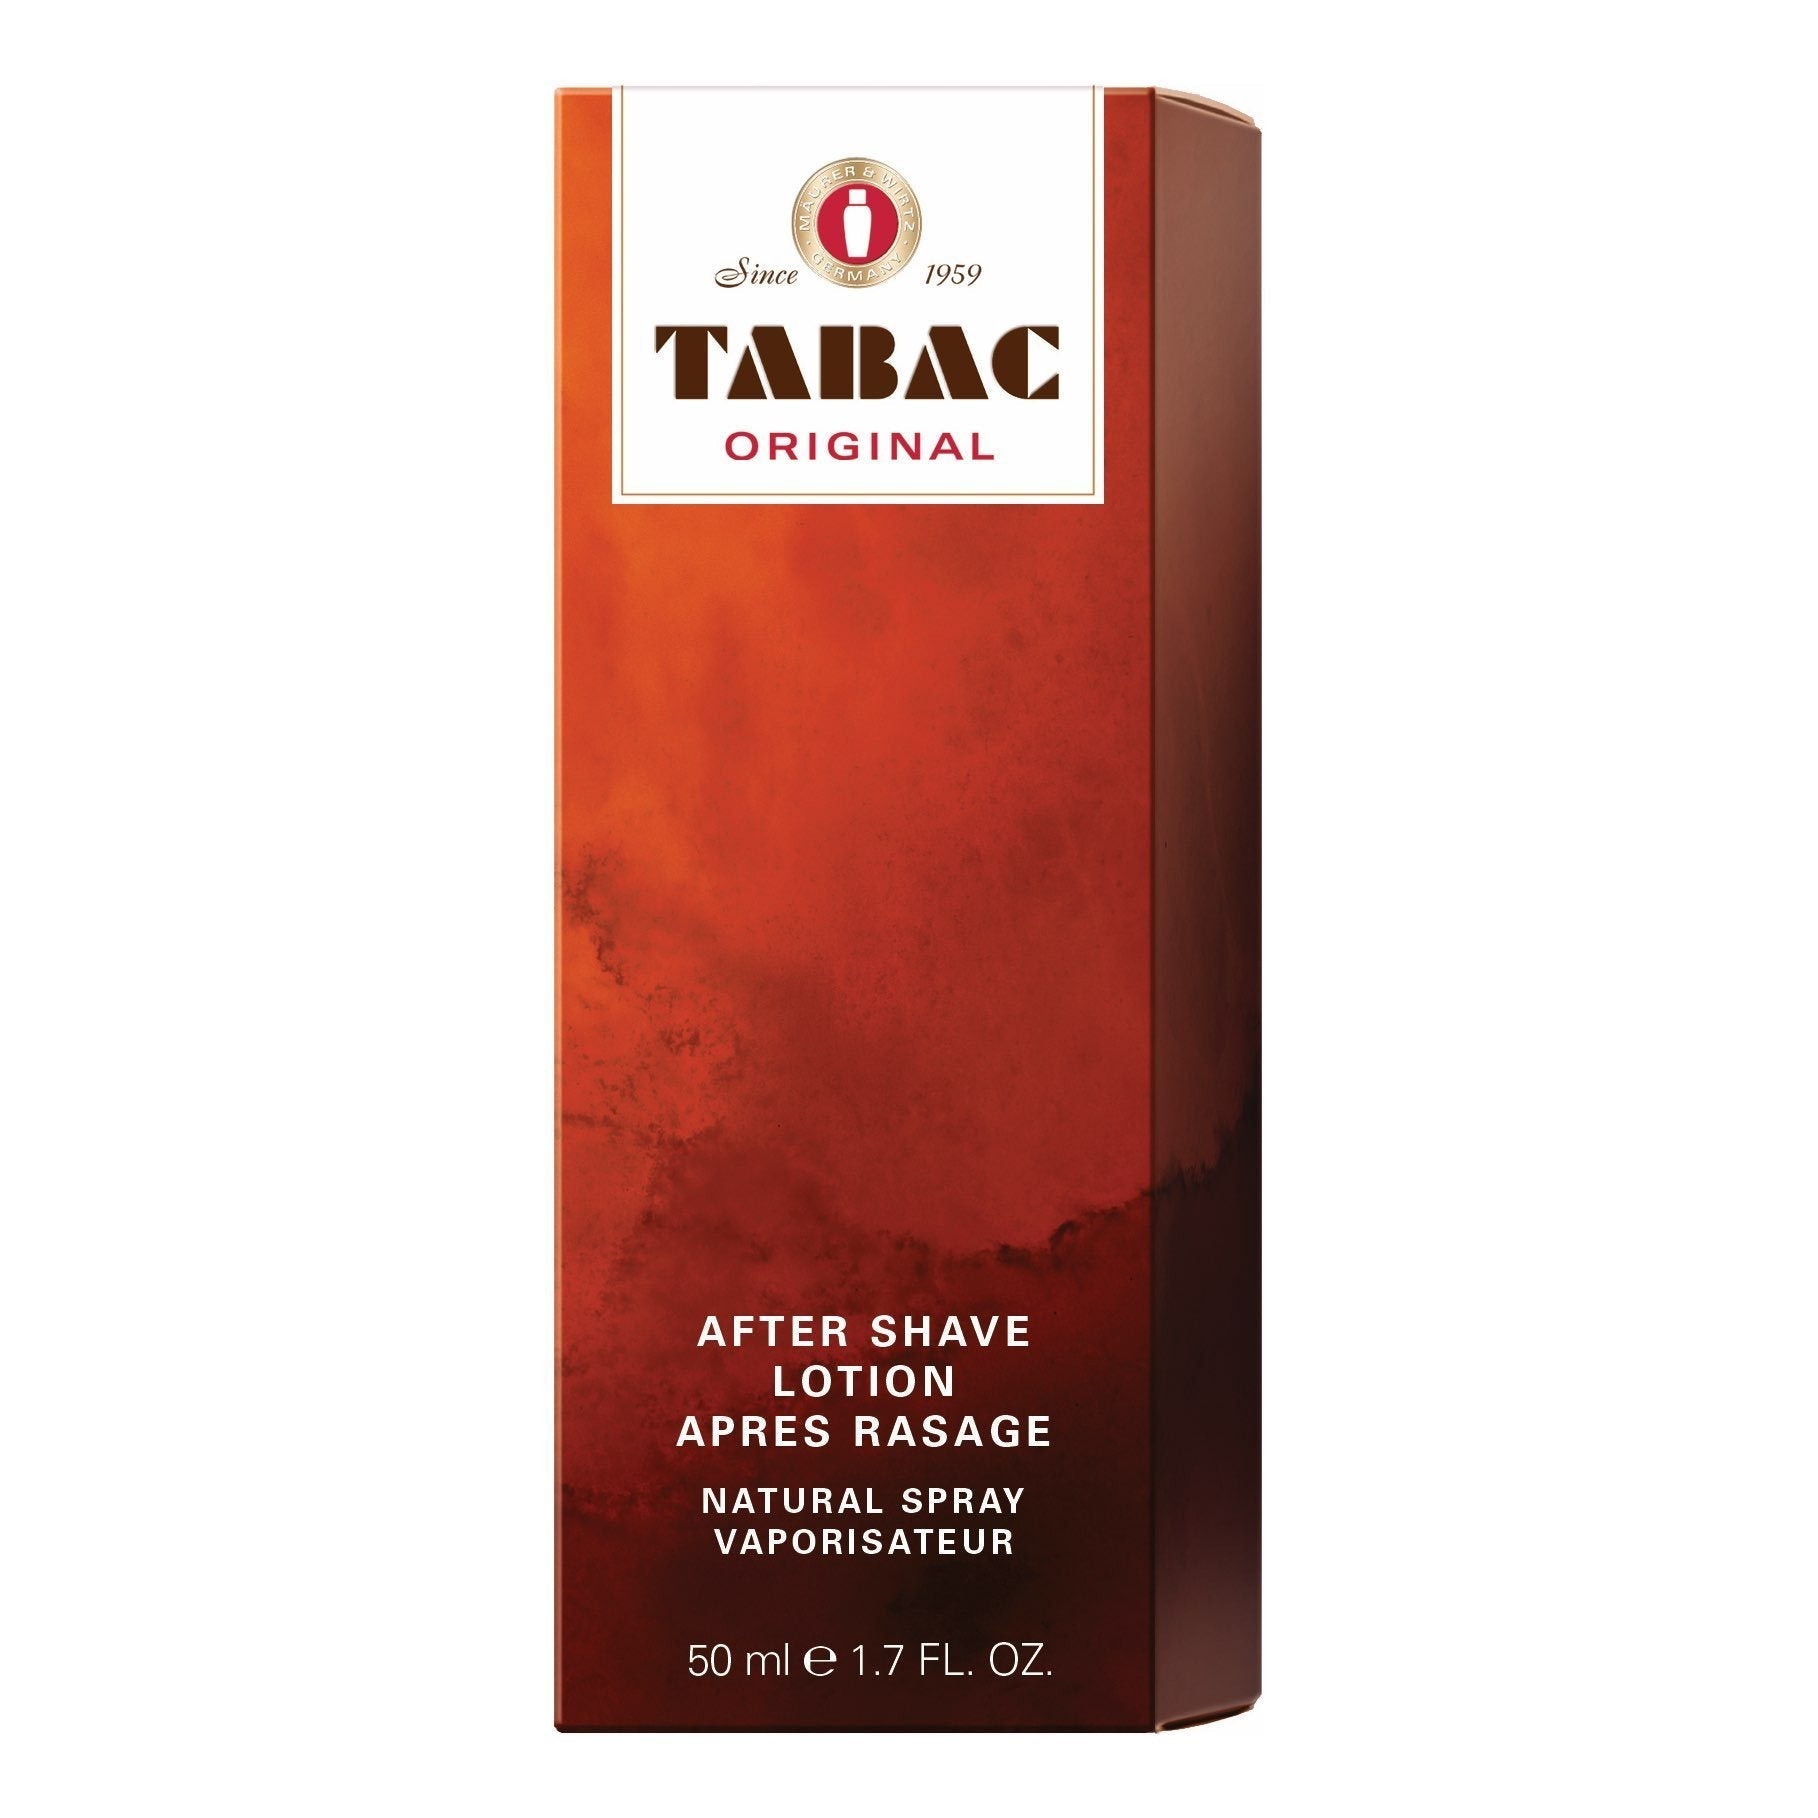 Tabac After Shave Lotion etterbarberingsvann